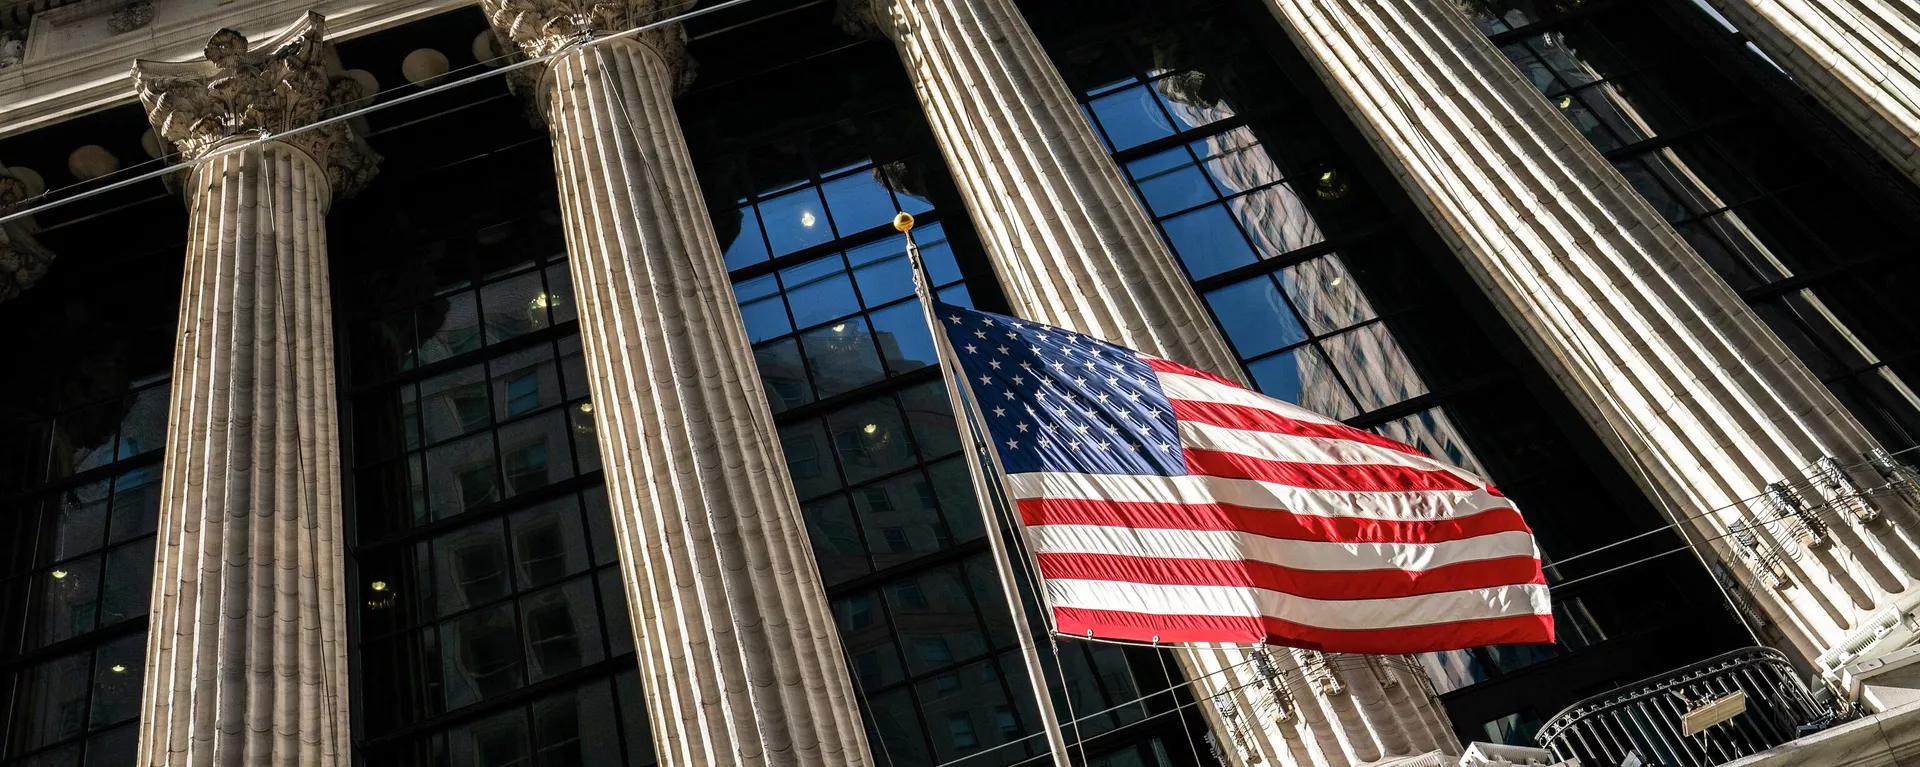 A U.S. flag waves outside the New York Stock Exchange, Monday, Jan. 24, 2022, in New York. Stocks are drifting between small gains and losses in the early going on Wall Street Tuesday, May 3, 2022 as investors await Wednesday's decision by the Federal Reserve on interest rates. The Fed is expected to raise its benchmark rate by twice the usual amount this week as it steps up its fight against inflation, which is at a four-decade high. - Sputnik International, 1920, 23.09.2023